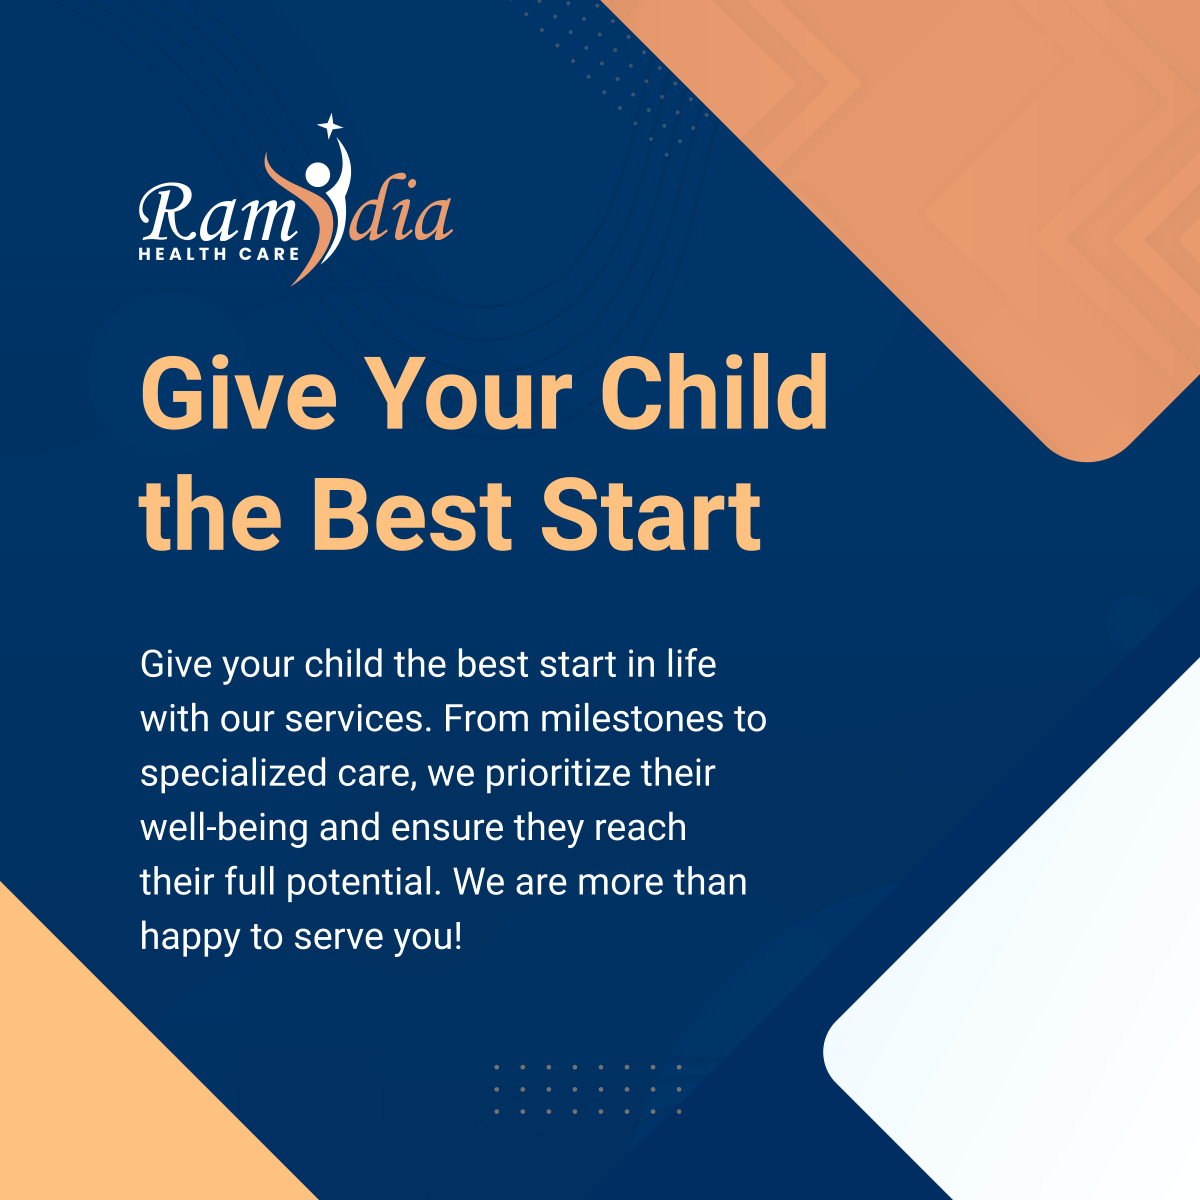 Give Your Child the Best Start

#SpecializedCare #Child #PerthAmboyNJ #HomeHealthCare